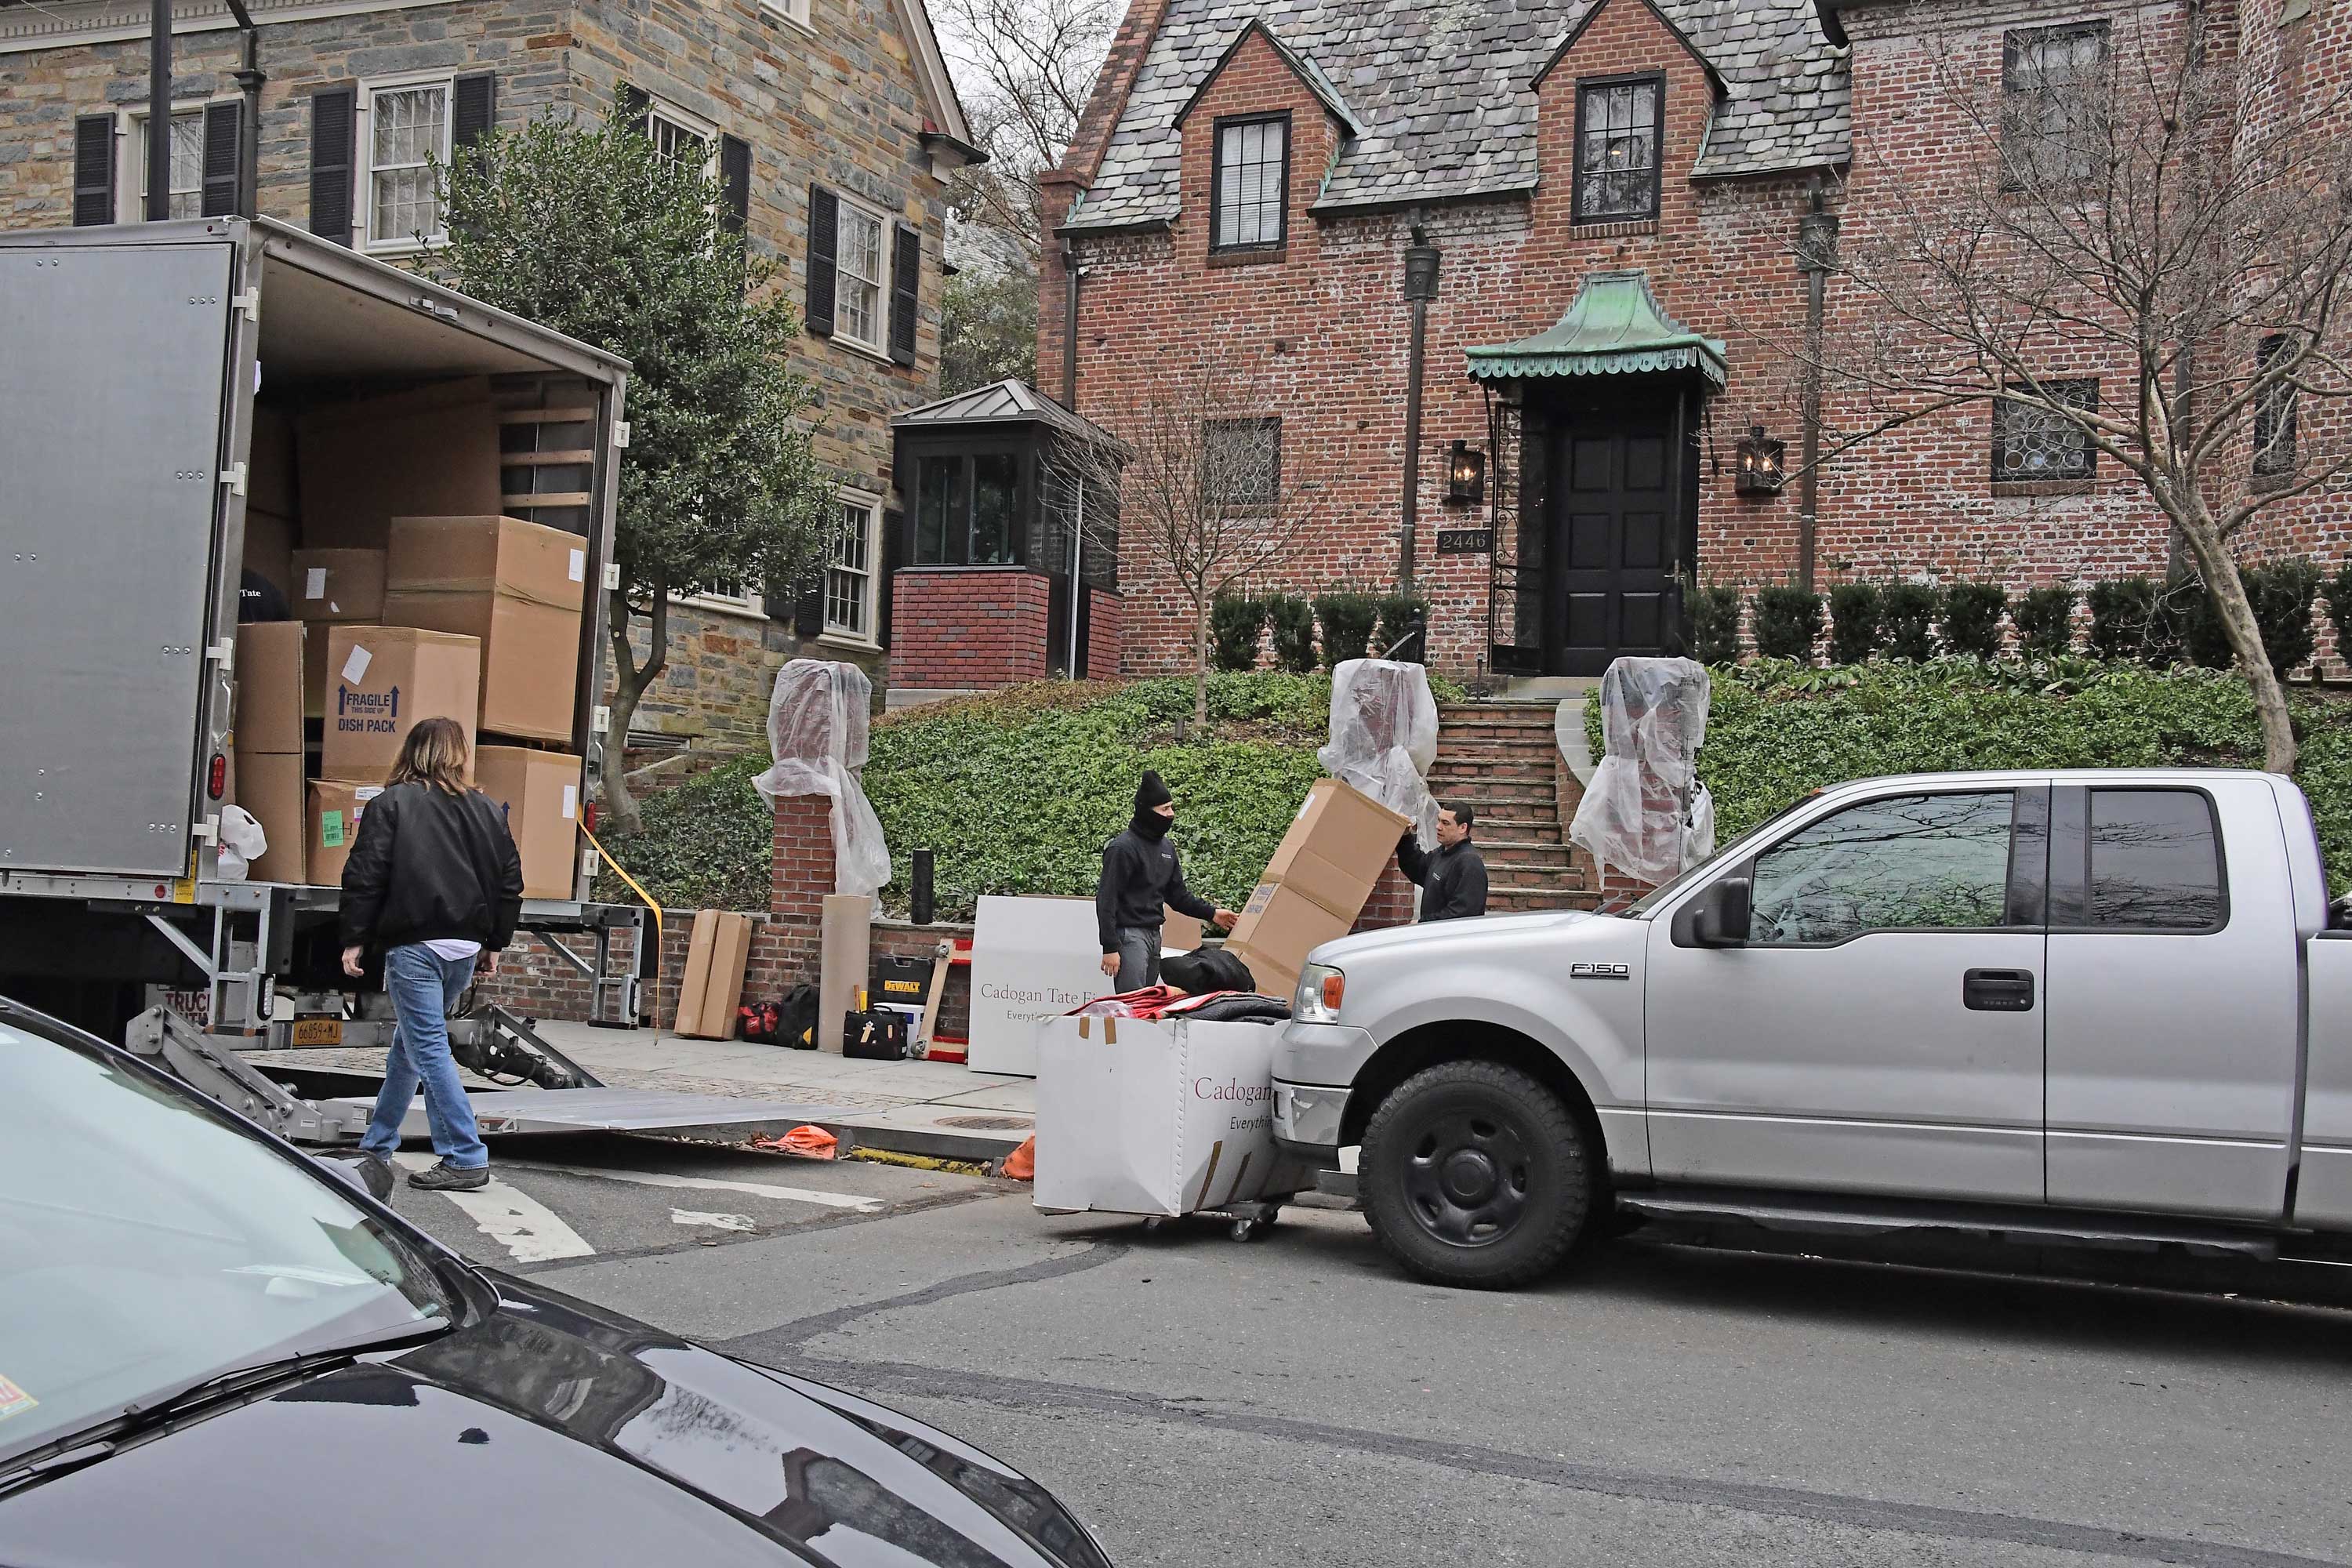 Movers take boxes from a truck to 2446 Belmont Road, NW in Washington, D.C. the home that President Barack Obama and his family will be living after he departs the White House Friday. (Photo: Ron Sachs/CNP/Polaris/Newscom) 